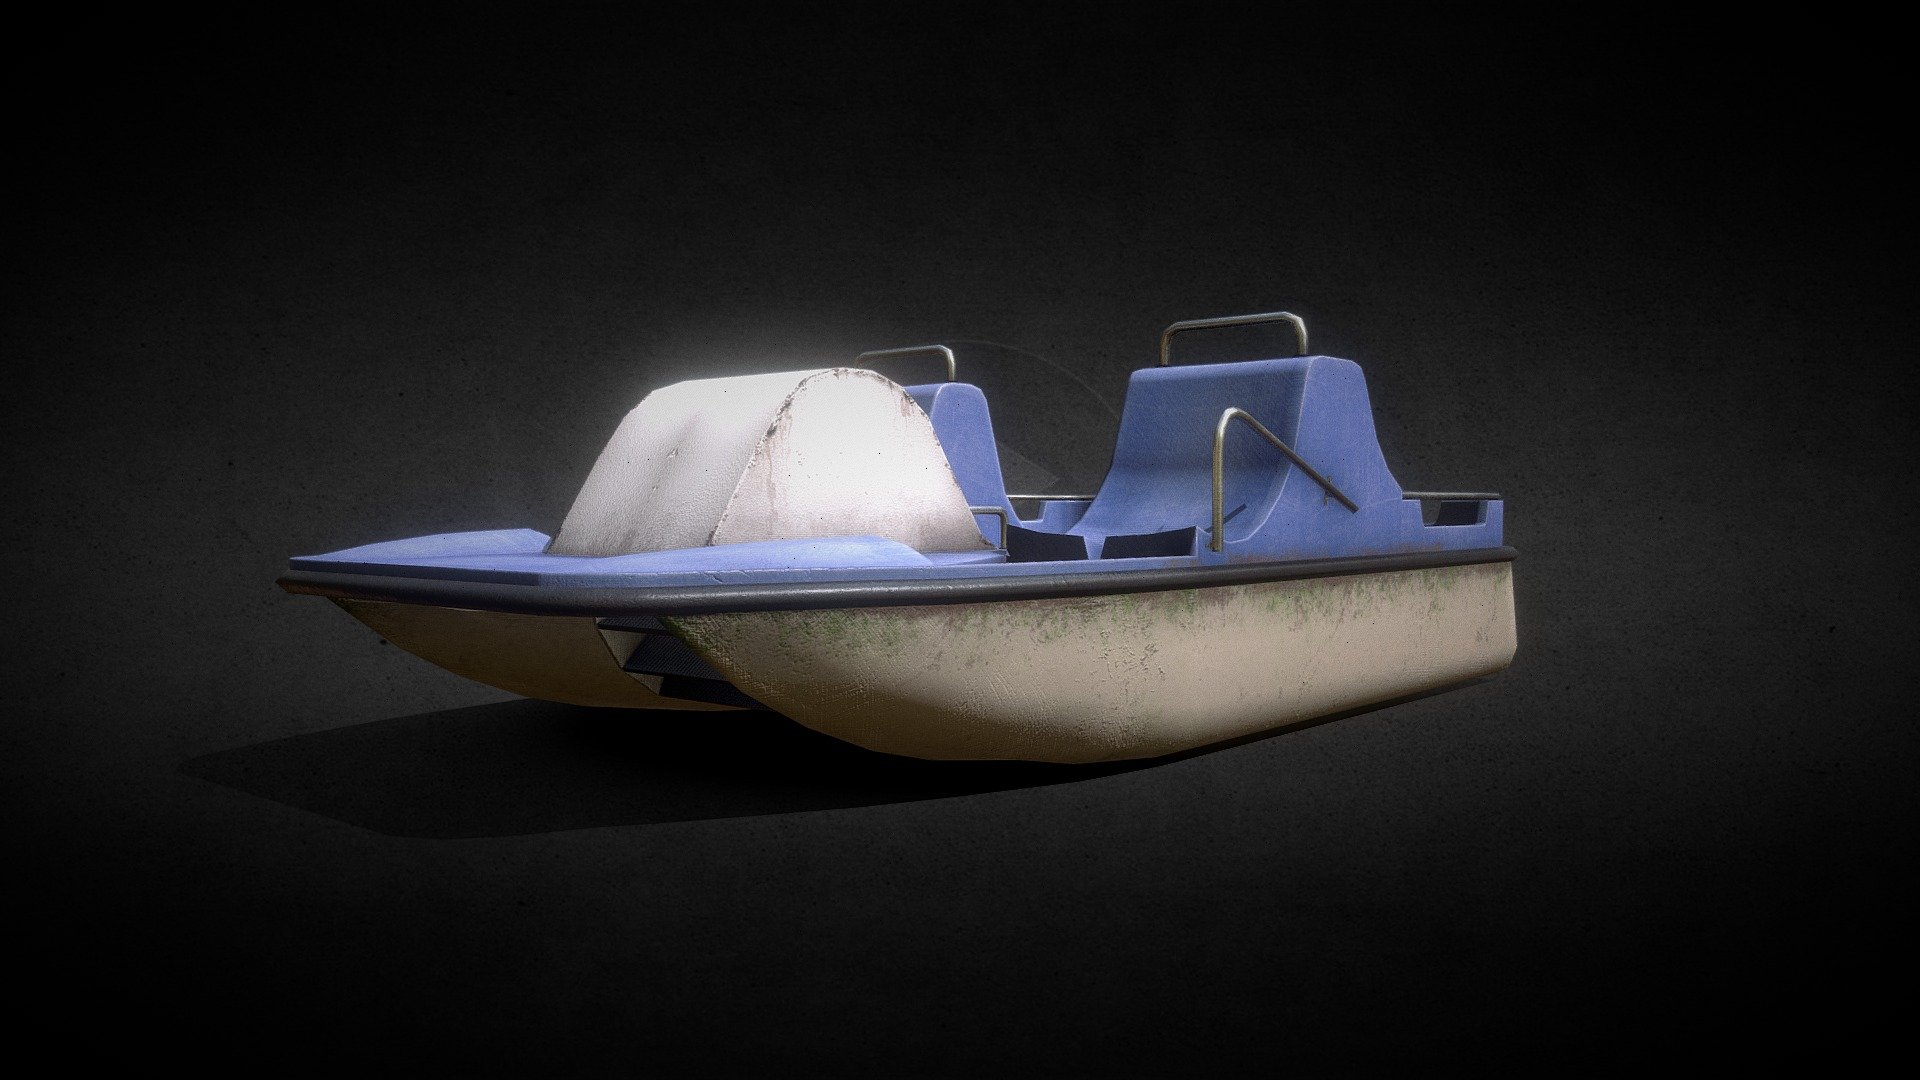 Paddle boat made for unity.
It uses a single 4k texture set.
Hopefully you guys like it :) - Paddle boat - 3D model by Kacperixs 3d model